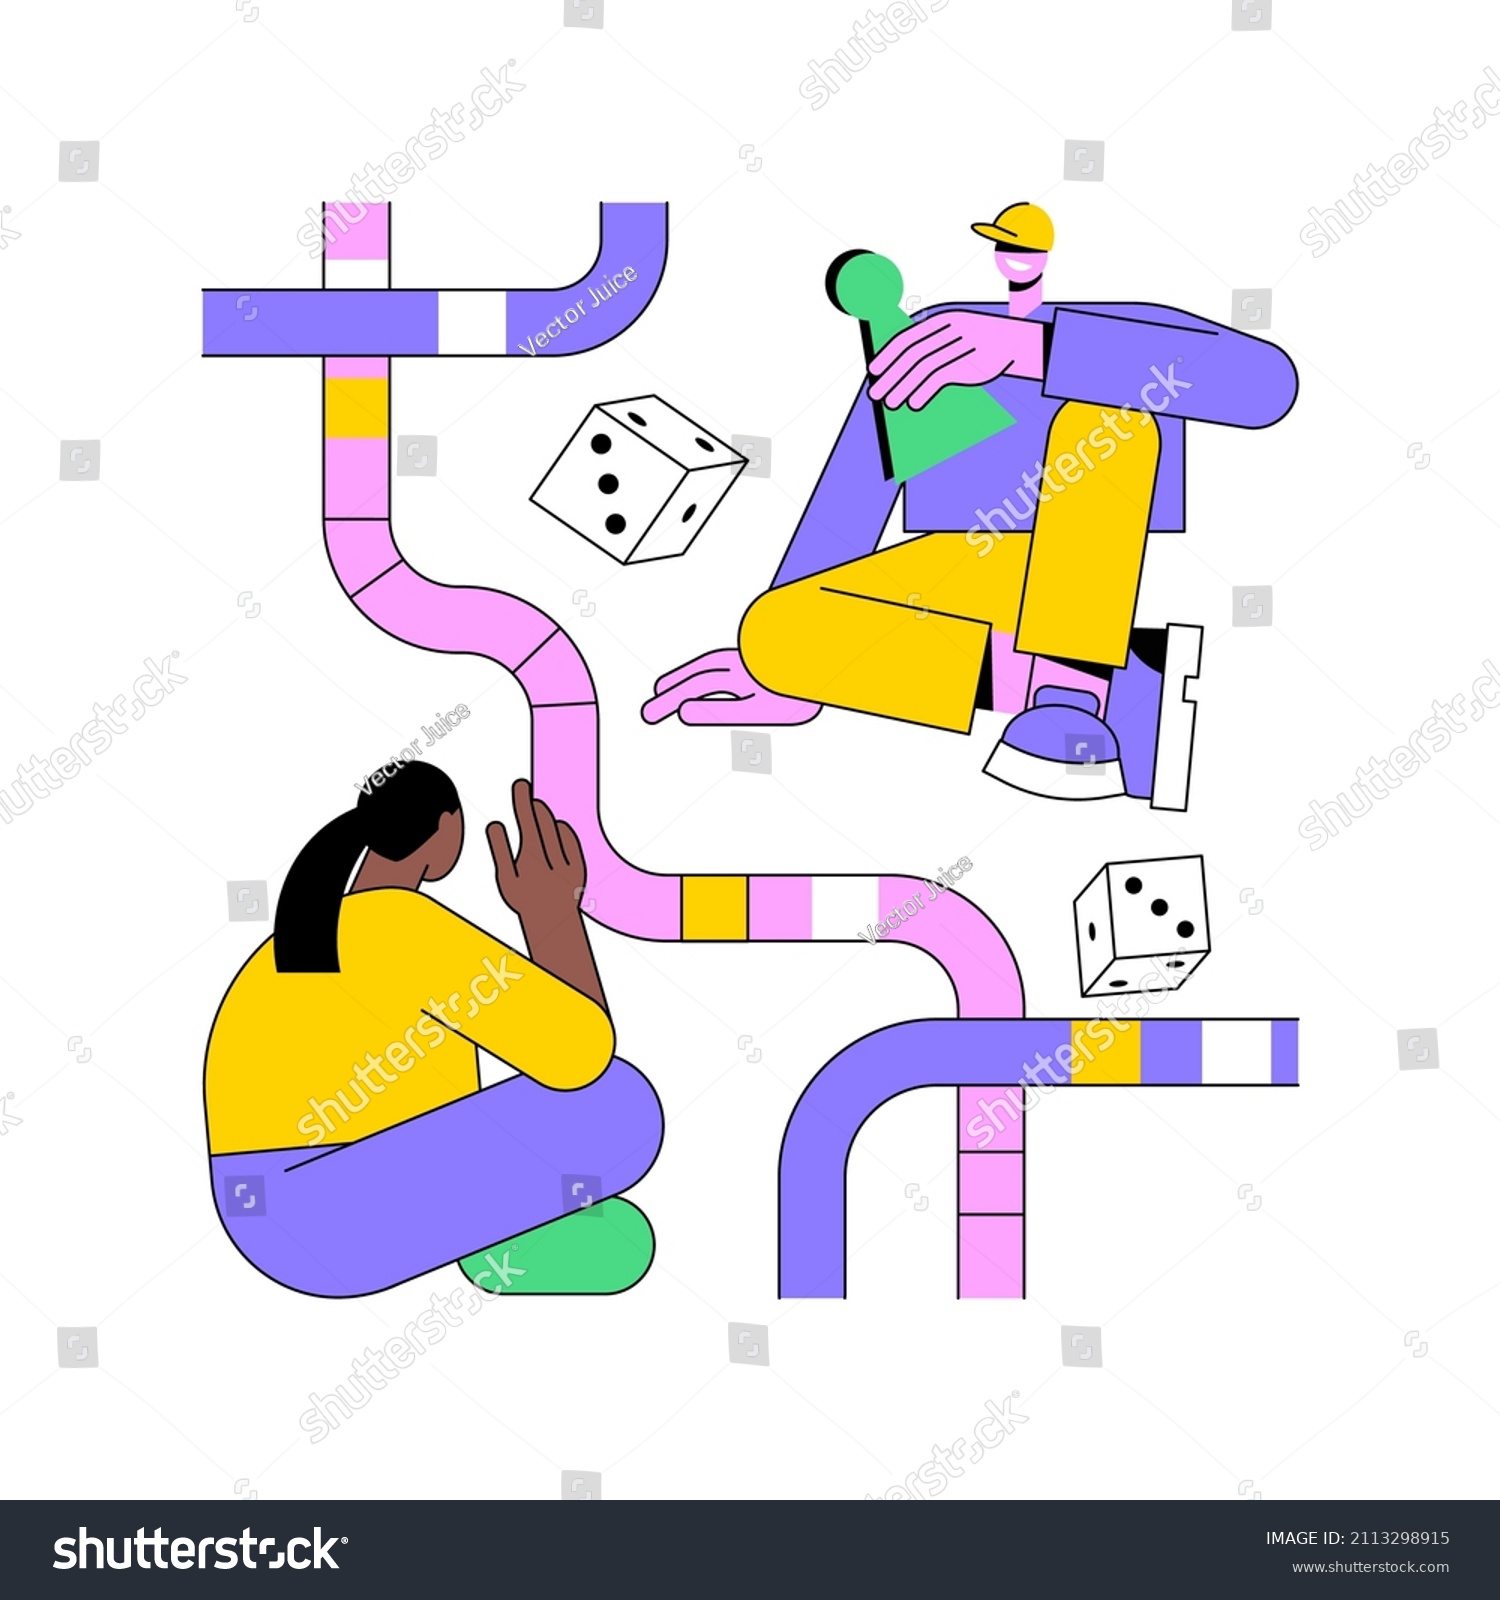 SVG of Board games abstract concept vector illustration. Tabletop activities, strategic gaming, stay at home gamers, social isolation free time spending, family fun activity idea abstract metaphor. svg